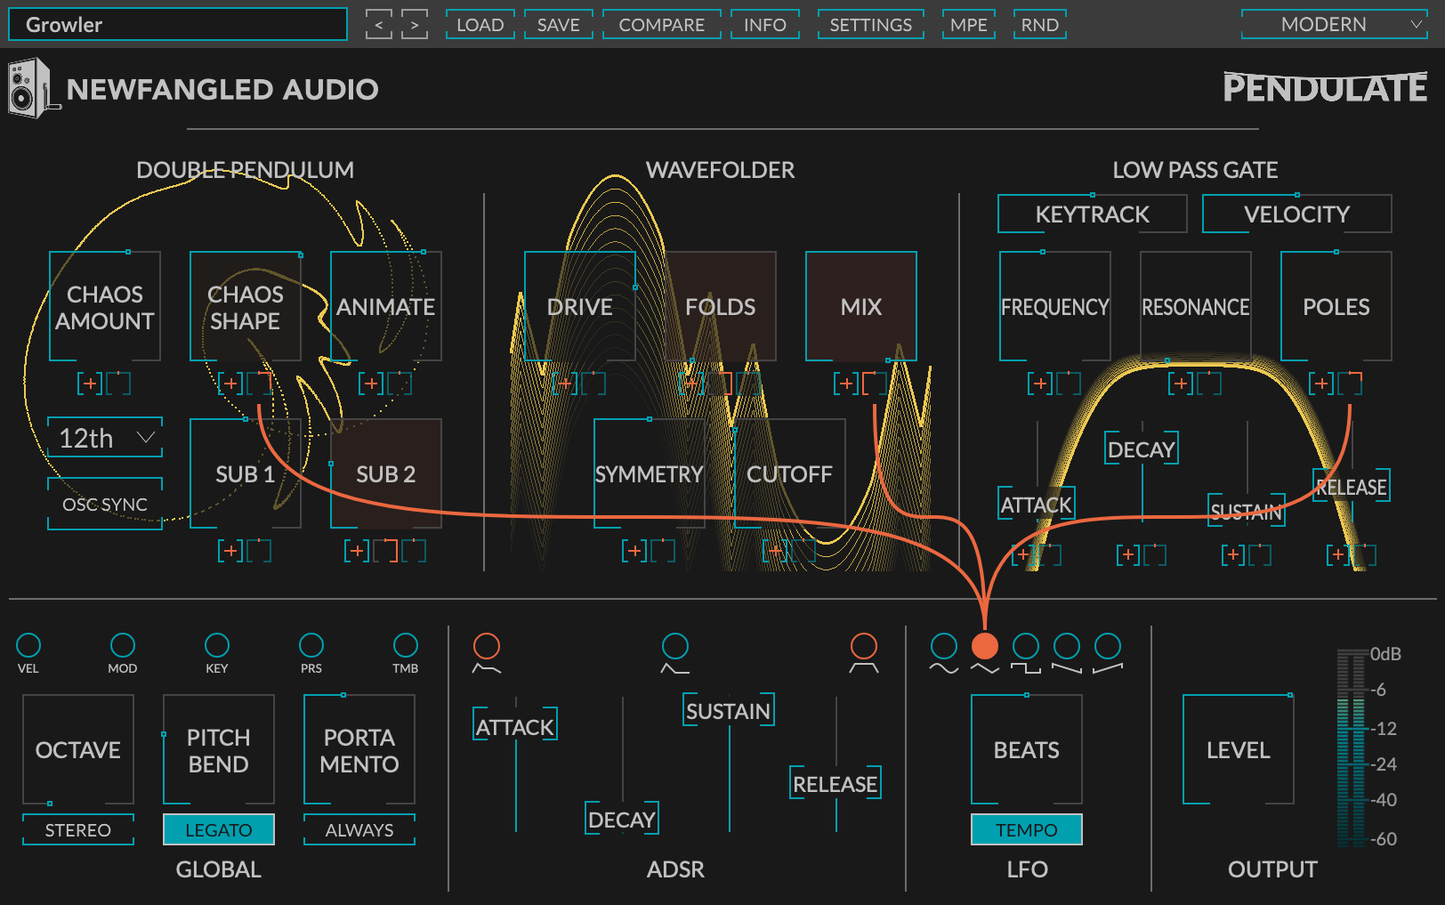 Pendulate-a-otherworldly-sounding-synth-plugin-by-effect-experts-eventide.